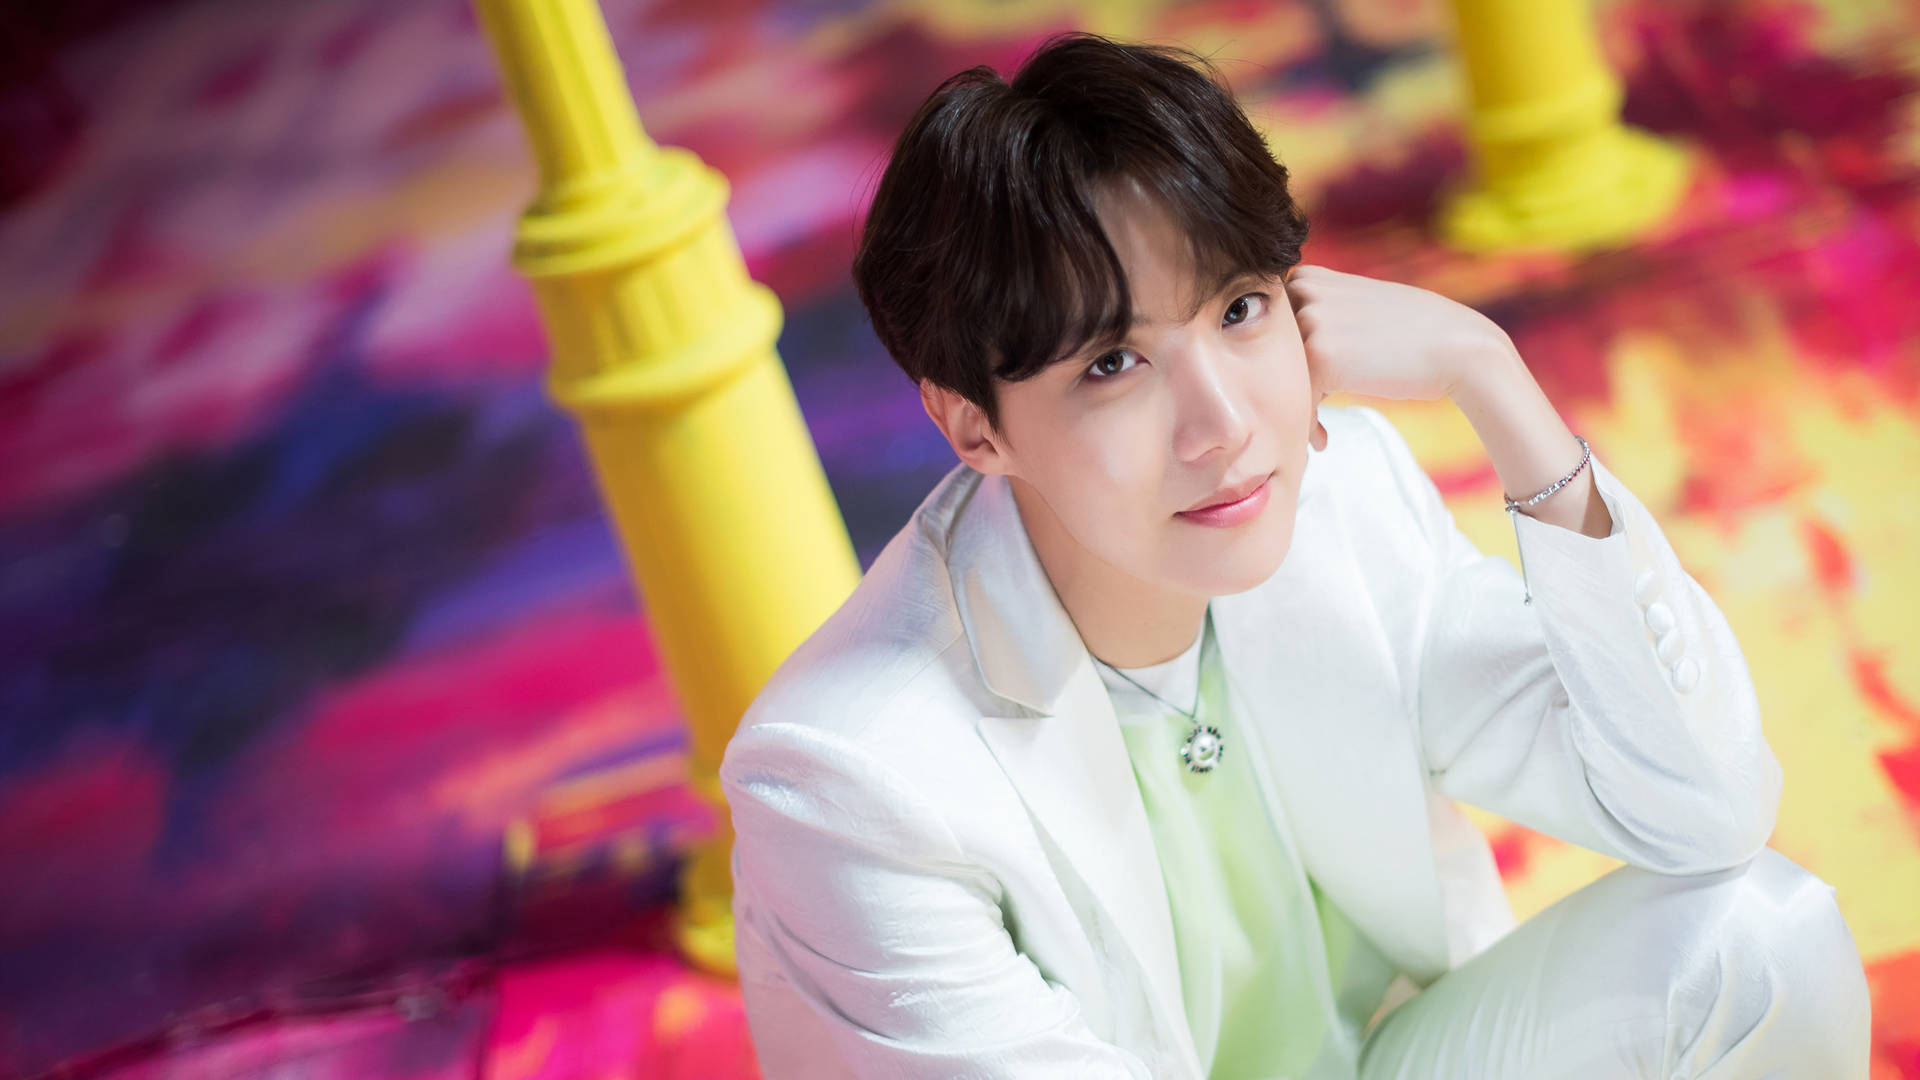 Boy With Luv J-hope